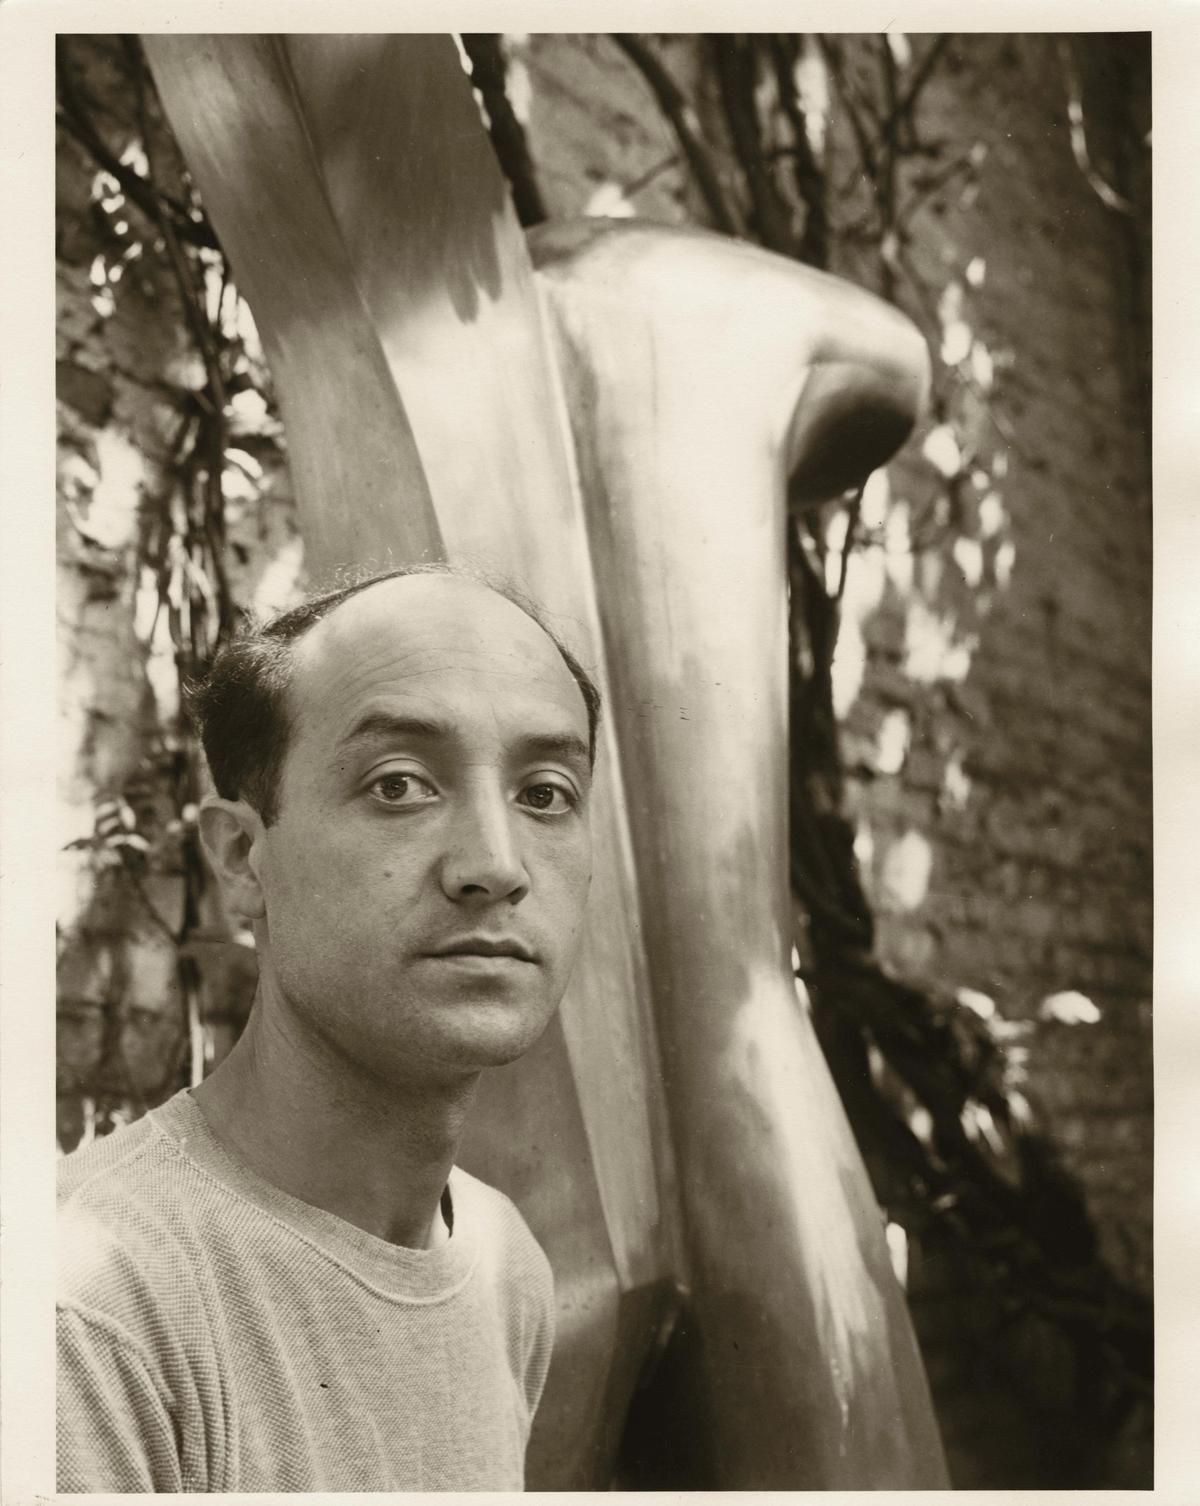 Isamu Noguchi in the courtyard of his MacDougal alley studio with Man Aviator (1943-49) © The Isamu Noguchi Foundation and Garden Museum, New York/ARS. Photo by Gina Hohensee